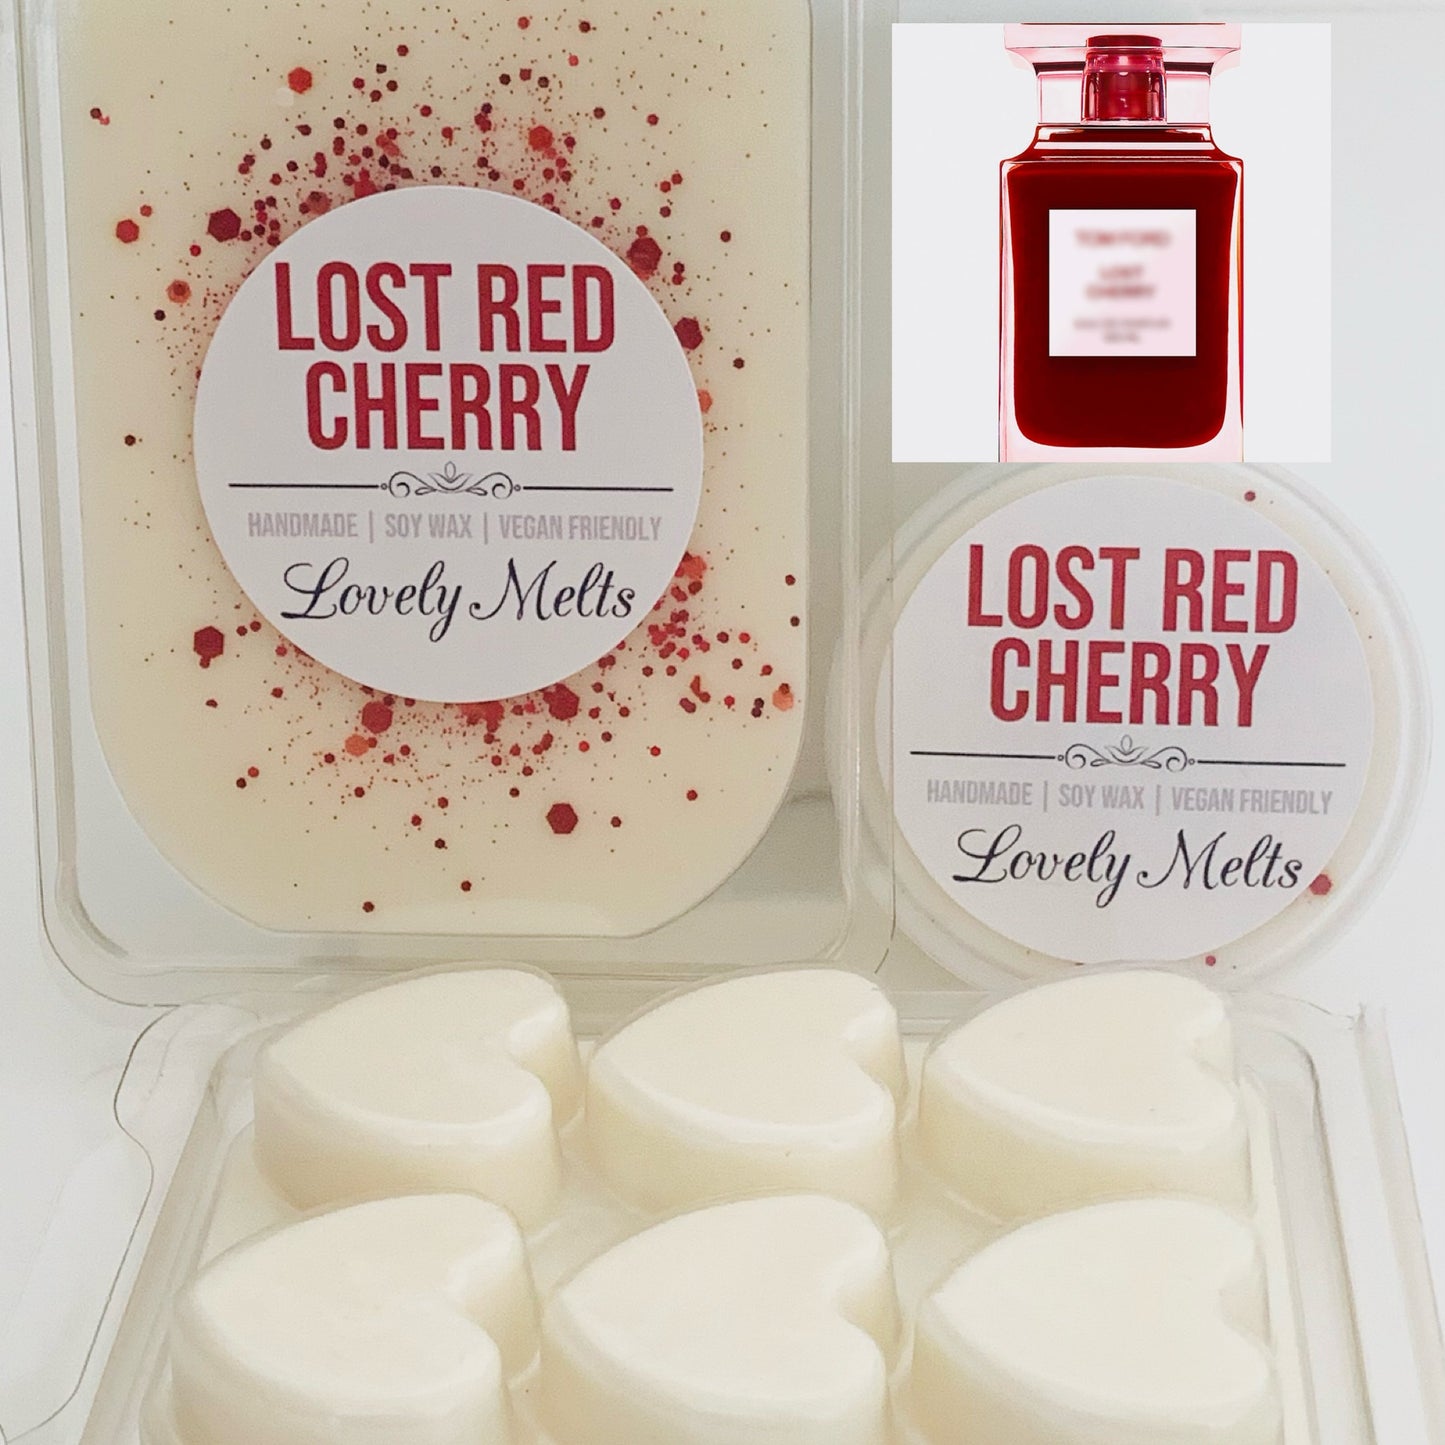 LOST RED CHERRY